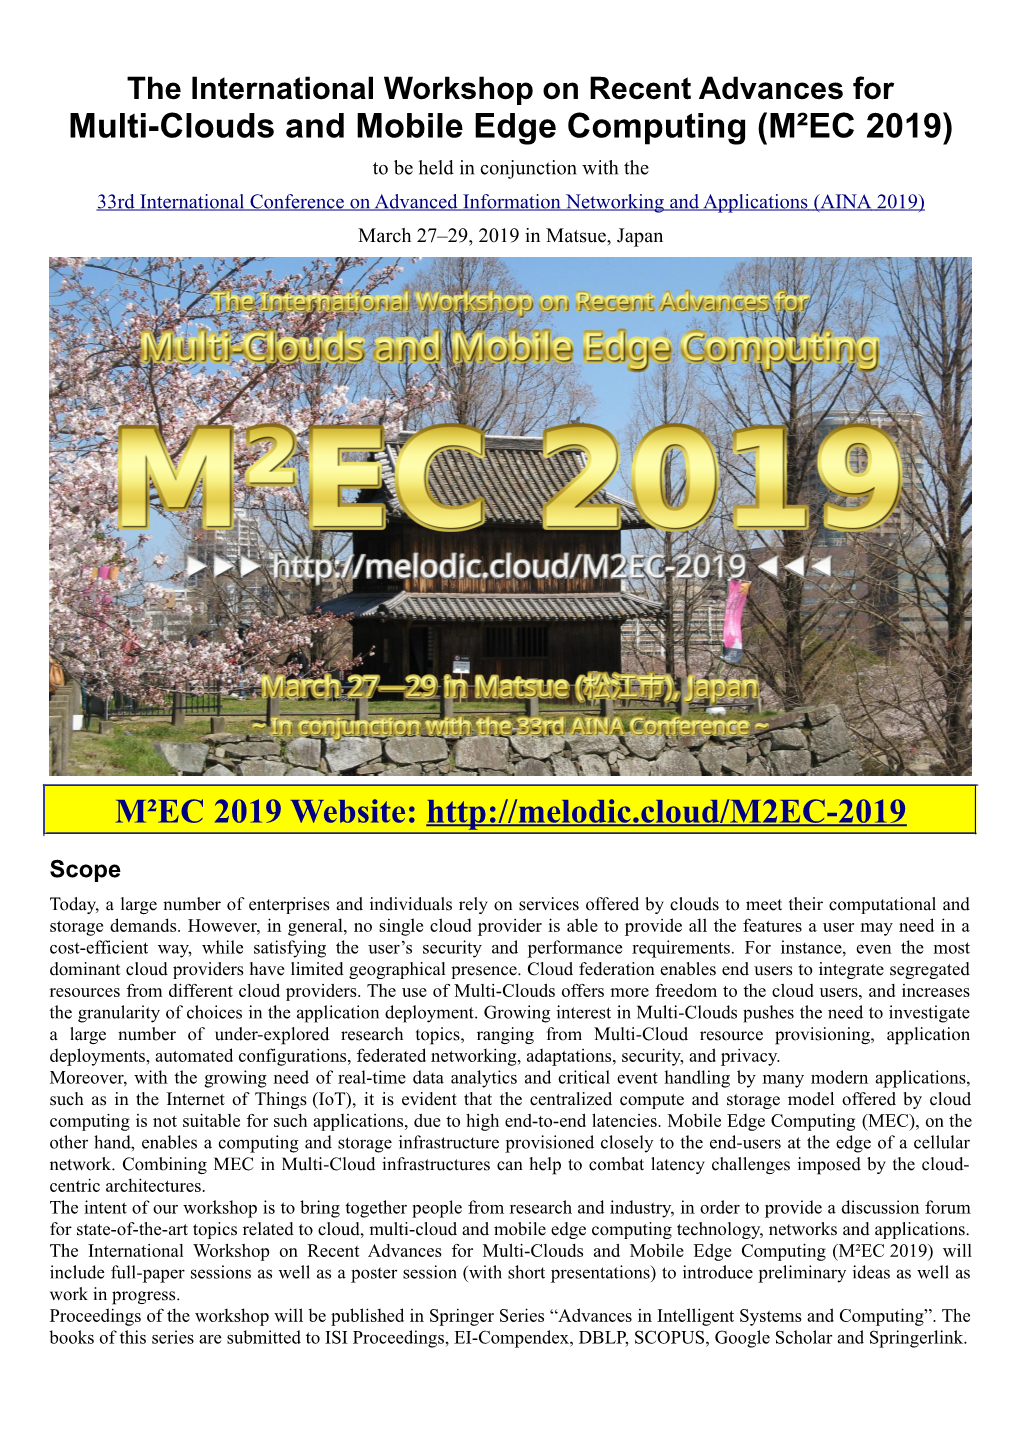 M²EC 2019 Call for Papers